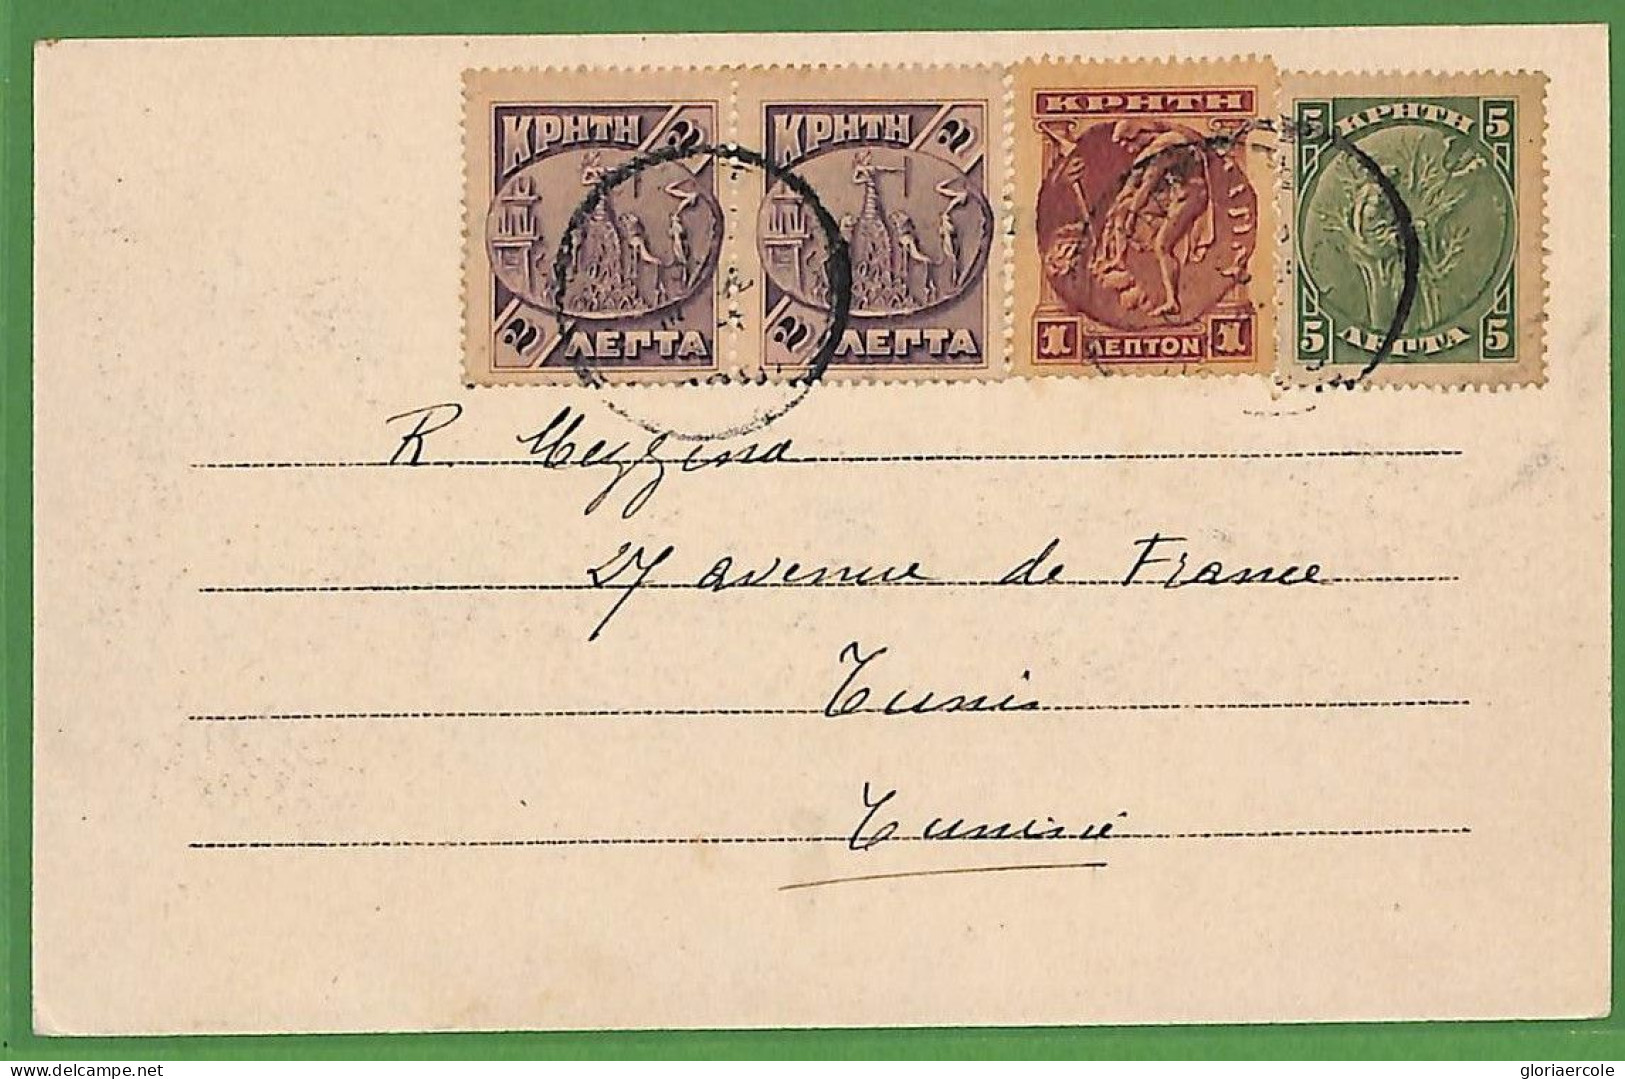 Ad0919 - GREECE - Postal History - Nice Franking On POSTCARD To TUNISIA ! 1900's - Covers & Documents